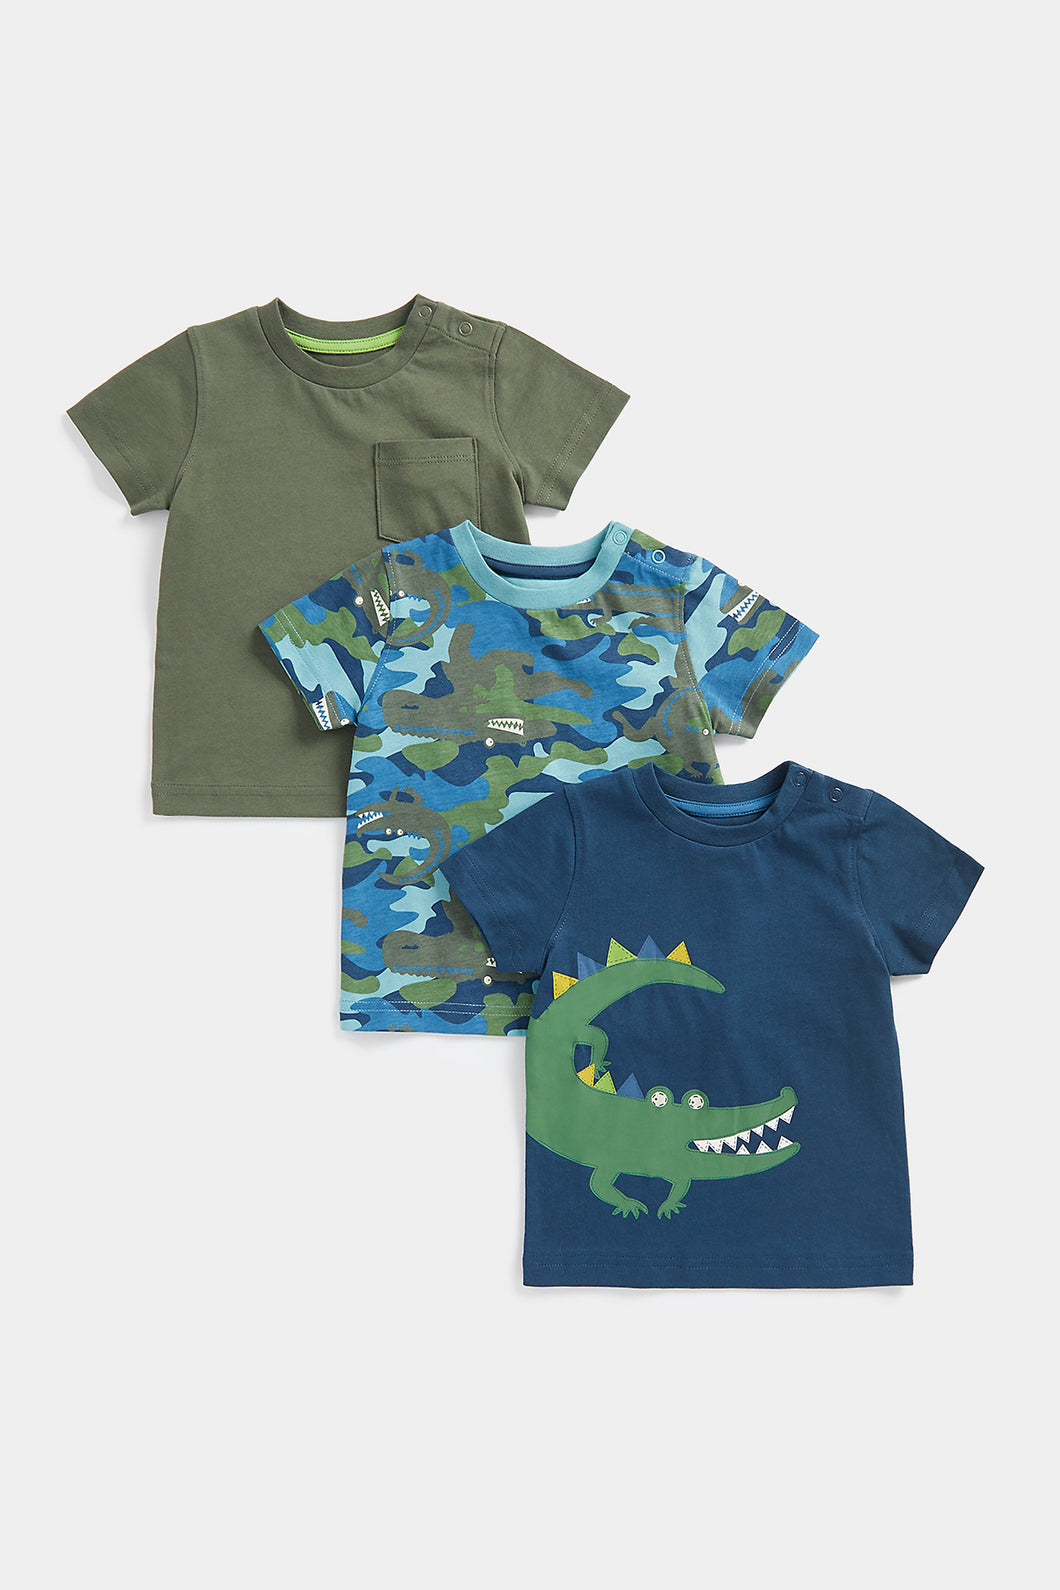 Mothercare Crocodile T-Shirts - 3 Pack